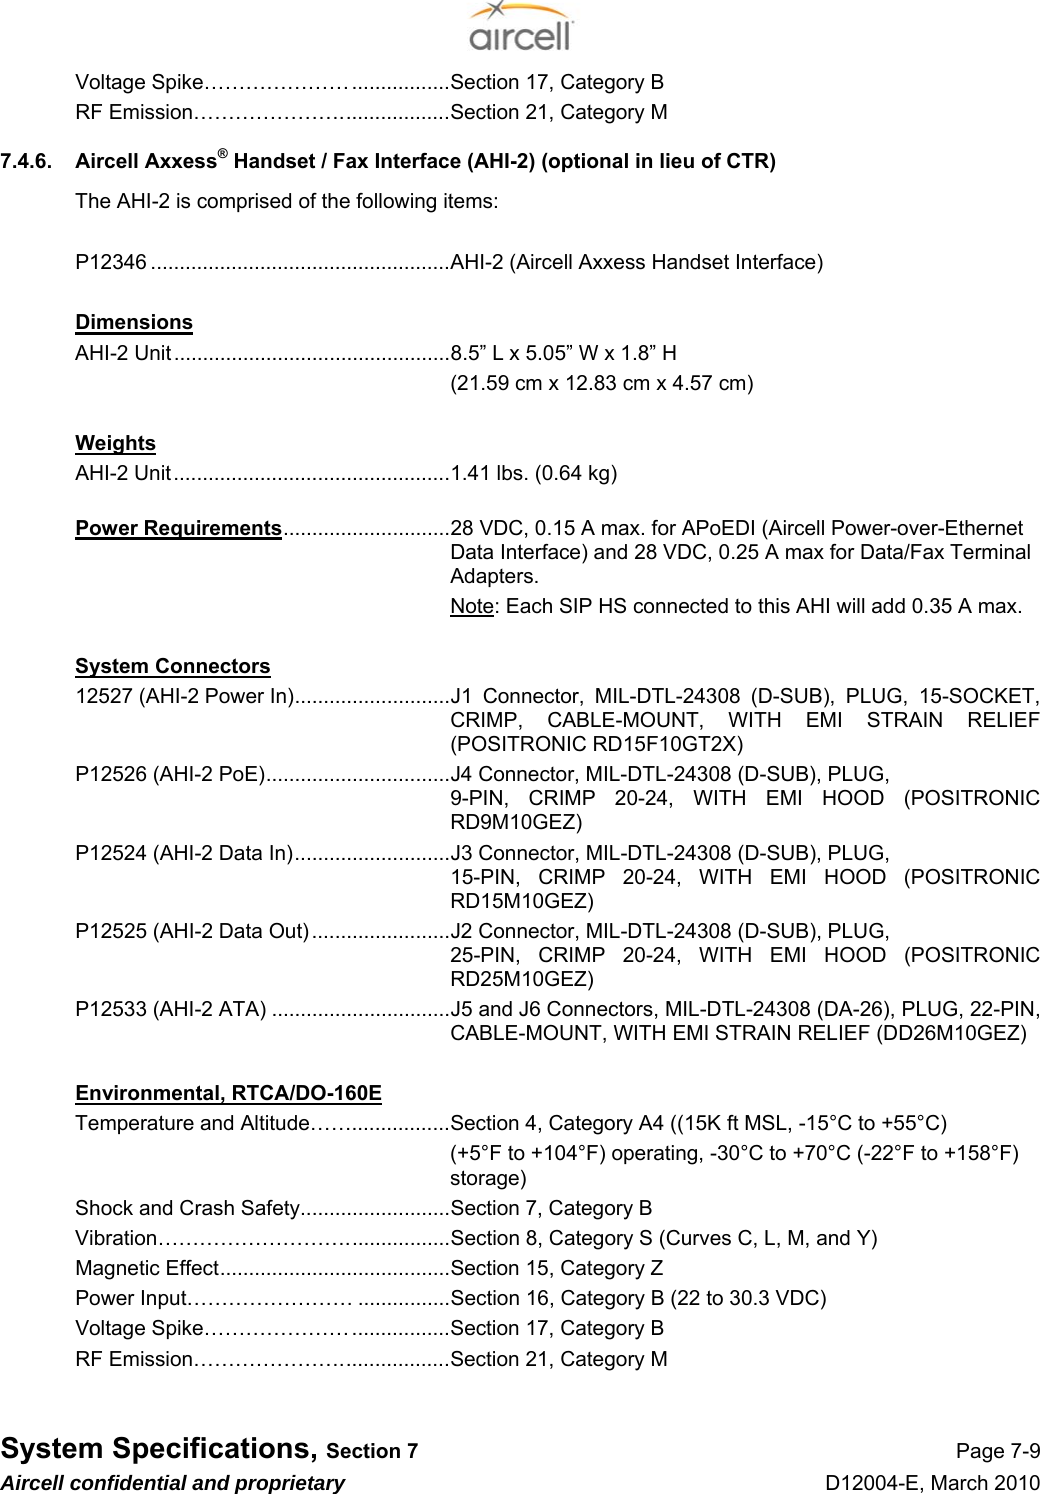  System Specifications, Section 7 Page 7-9 Aircell confidential and proprietary D12004-E, March 2010 Voltage Spike………………….................Section 17, Category B RF Emission…………………...................Section 21, Category M 7.4.6.  Aircell Axxess® Handset / Fax Interface (AHI-2) (optional in lieu of CTR)   The AHI-2 is comprised of the following items:  P12346 ....................................................AHI-2 (Aircell Axxess Handset Interface)  Dimensions AHI-2 Unit................................................8.5” L x 5.05” W x 1.8” H   (21.59 cm x 12.83 cm x 4.57 cm)  Weights AHI-2 Unit................................................1.41 lbs. (0.64 kg)  Power Requirements.............................28 VDC, 0.15 A max. for APoEDI (Aircell Power-over-Ethernet Data Interface) and 28 VDC, 0.25 A max for Data/Fax Terminal Adapters.  Note: Each SIP HS connected to this AHI will add 0.35 A max.  System Connectors 12527 (AHI-2 Power In)...........................J1 Connector, MIL-DTL-24308 (D-SUB), PLUG, 15-SOCKET, CRIMP, CABLE-MOUNT, WITH EMI STRAIN RELIEF (POSITRONIC RD15F10GT2X) P12526 (AHI-2 PoE)................................J4 Connector, MIL-DTL-24308 (D-SUB), PLUG,  9-PIN, CRIMP 20-24, WITH EMI HOOD (POSITRONIC RD9M10GEZ) P12524 (AHI-2 Data In)...........................J3 Connector, MIL-DTL-24308 (D-SUB), PLUG,  15-PIN, CRIMP 20-24, WITH EMI HOOD (POSITRONIC RD15M10GEZ) P12525 (AHI-2 Data Out) ........................J2 Connector, MIL-DTL-24308 (D-SUB), PLUG,  25-PIN, CRIMP 20-24, WITH EMI HOOD (POSITRONIC RD25M10GEZ) P12533 (AHI-2 ATA) ...............................J5 and J6 Connectors, MIL-DTL-24308 (DA-26), PLUG, 22-PIN, CABLE-MOUNT, WITH EMI STRAIN RELIEF (DD26M10GEZ)  Environmental, RTCA/DO-160E Temperature and Altitude…….................Section 4, Category A4 ((15K ft MSL, -15°C to +55°C) (+5°F to +104°F) operating, -30°C to +70°C (-22°F to +158°F) storage) Shock and Crash Safety..........................Section 7, Category B Vibration………………………..................Section 8, Category S (Curves C, L, M, and Y) Magnetic Effect........................................Section 15, Category Z Power Input…………………… ................Section 16, Category B (22 to 30.3 VDC) Voltage Spike………………….................Section 17, Category B RF Emission…………………...................Section 21, Category M  